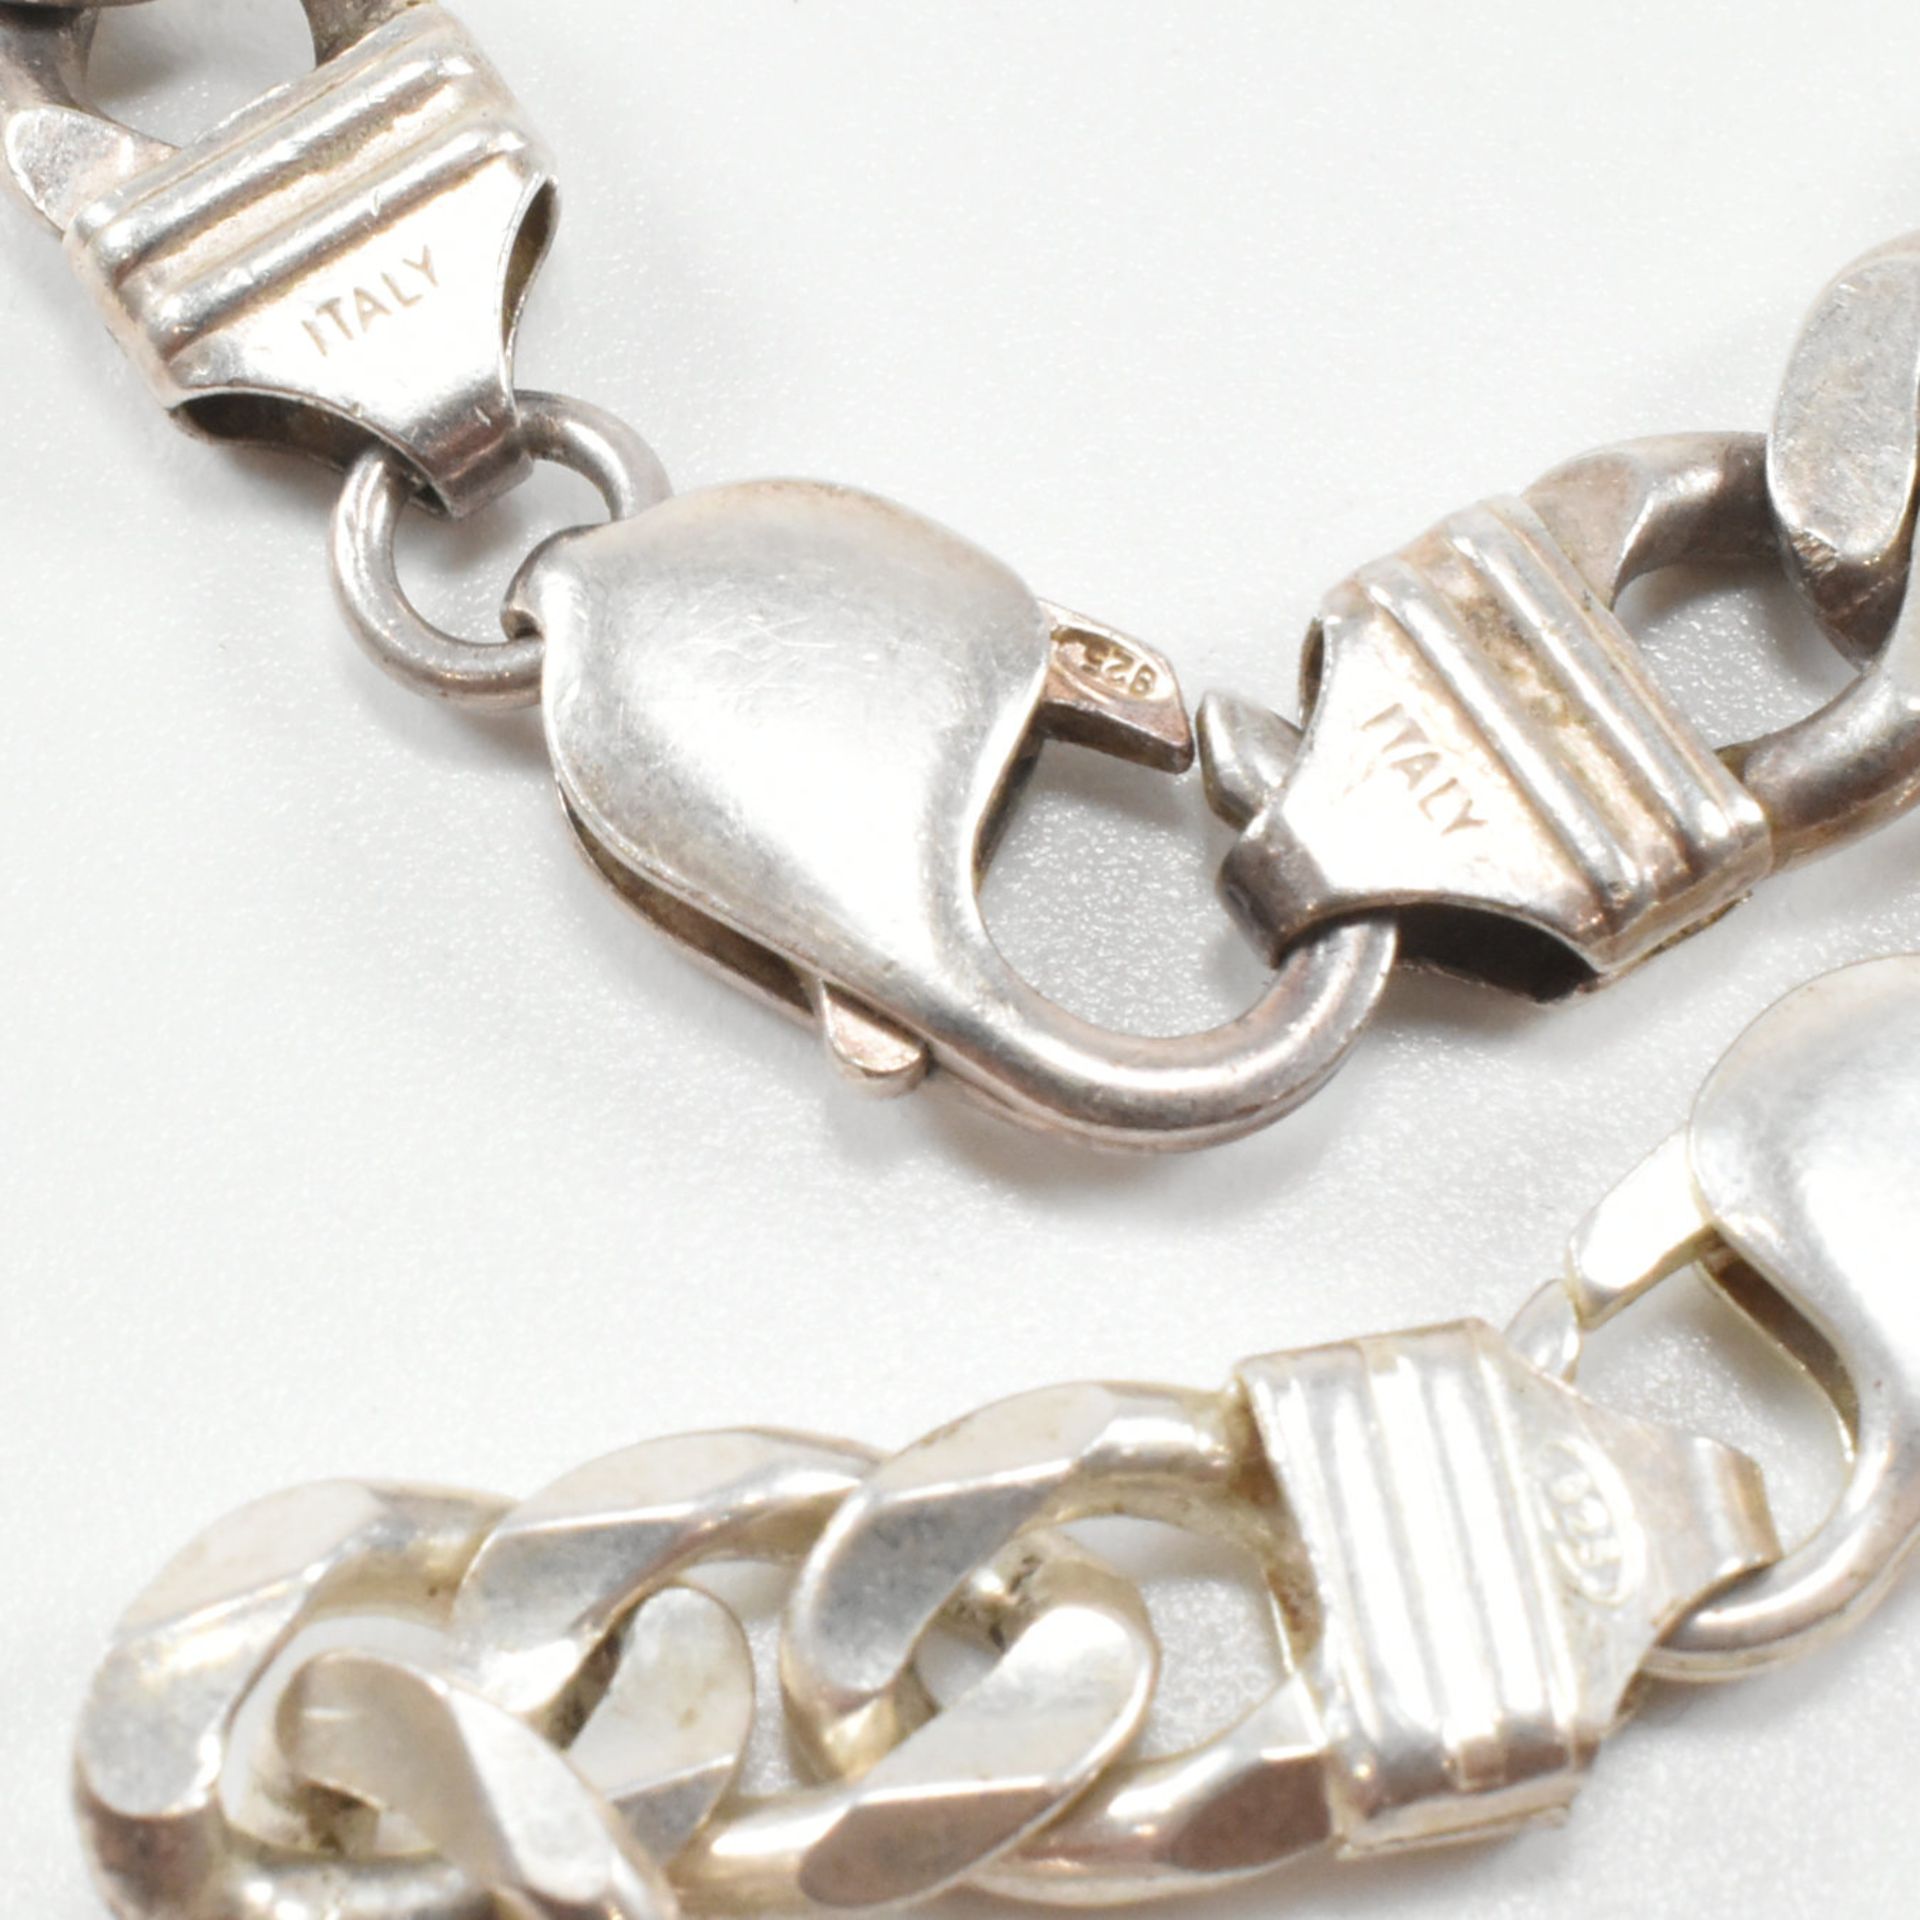 CONTEMPORARY ITALIAN 925 SILVER CURB LINK CHAIN & BRACELET - Image 6 of 7